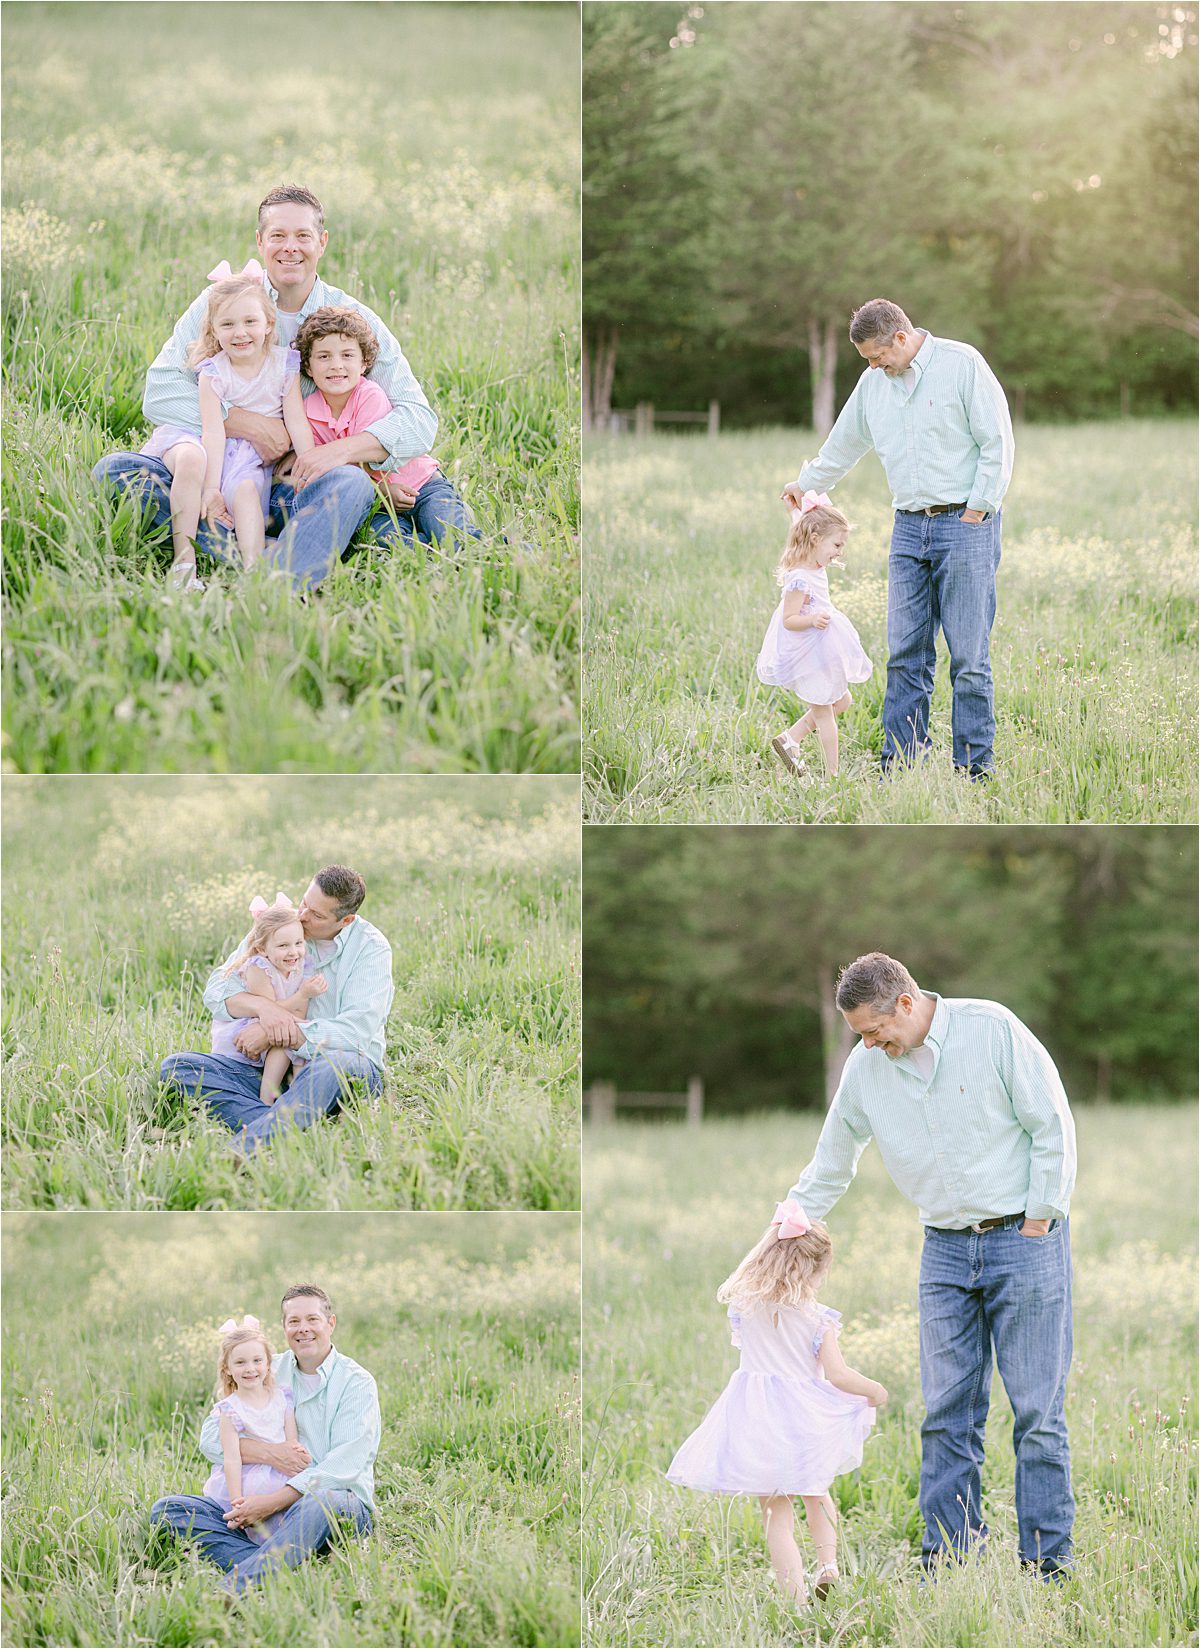 Athens, GA spring family pictures of father with his daughter in a field with wildflowers.